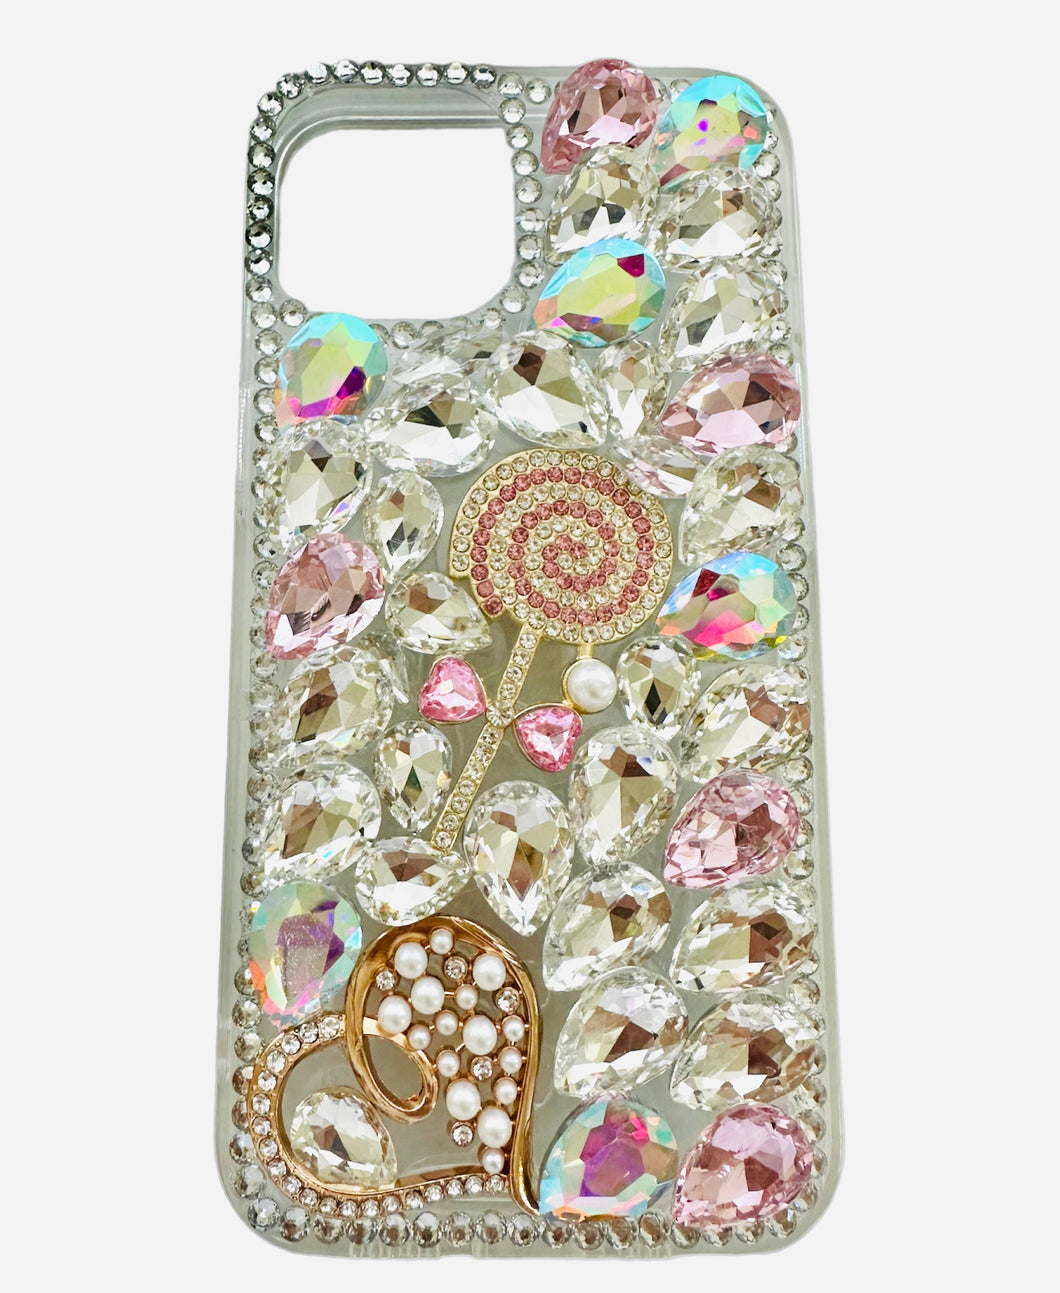 Shiny, Crystal Iphone Cases with Heart and Lollipop Design　ロリポップ